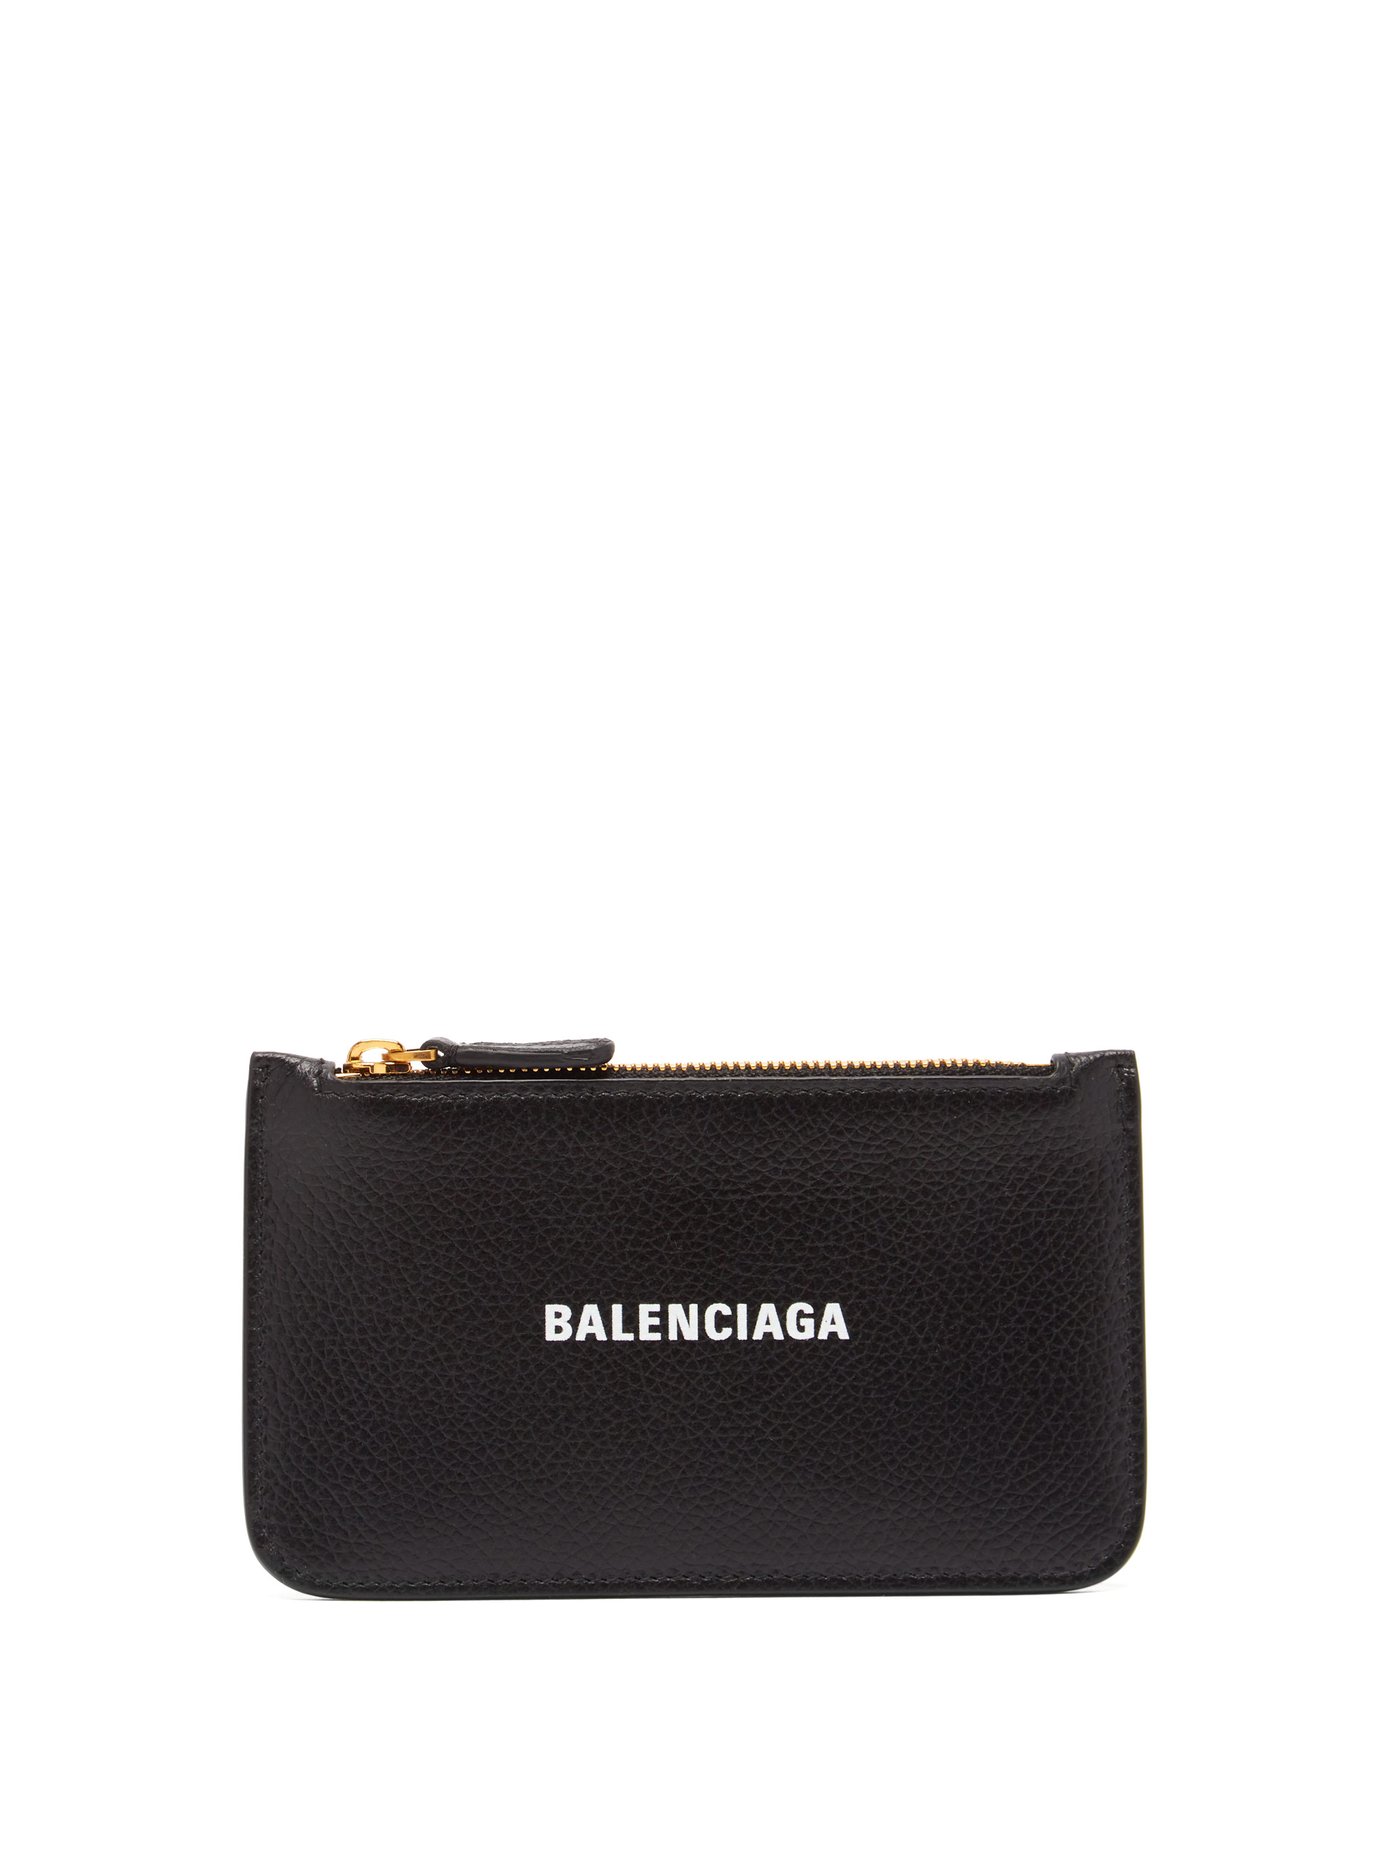 Balenciaga Coin Wallet on Sale, UP TO 70% OFF | www 